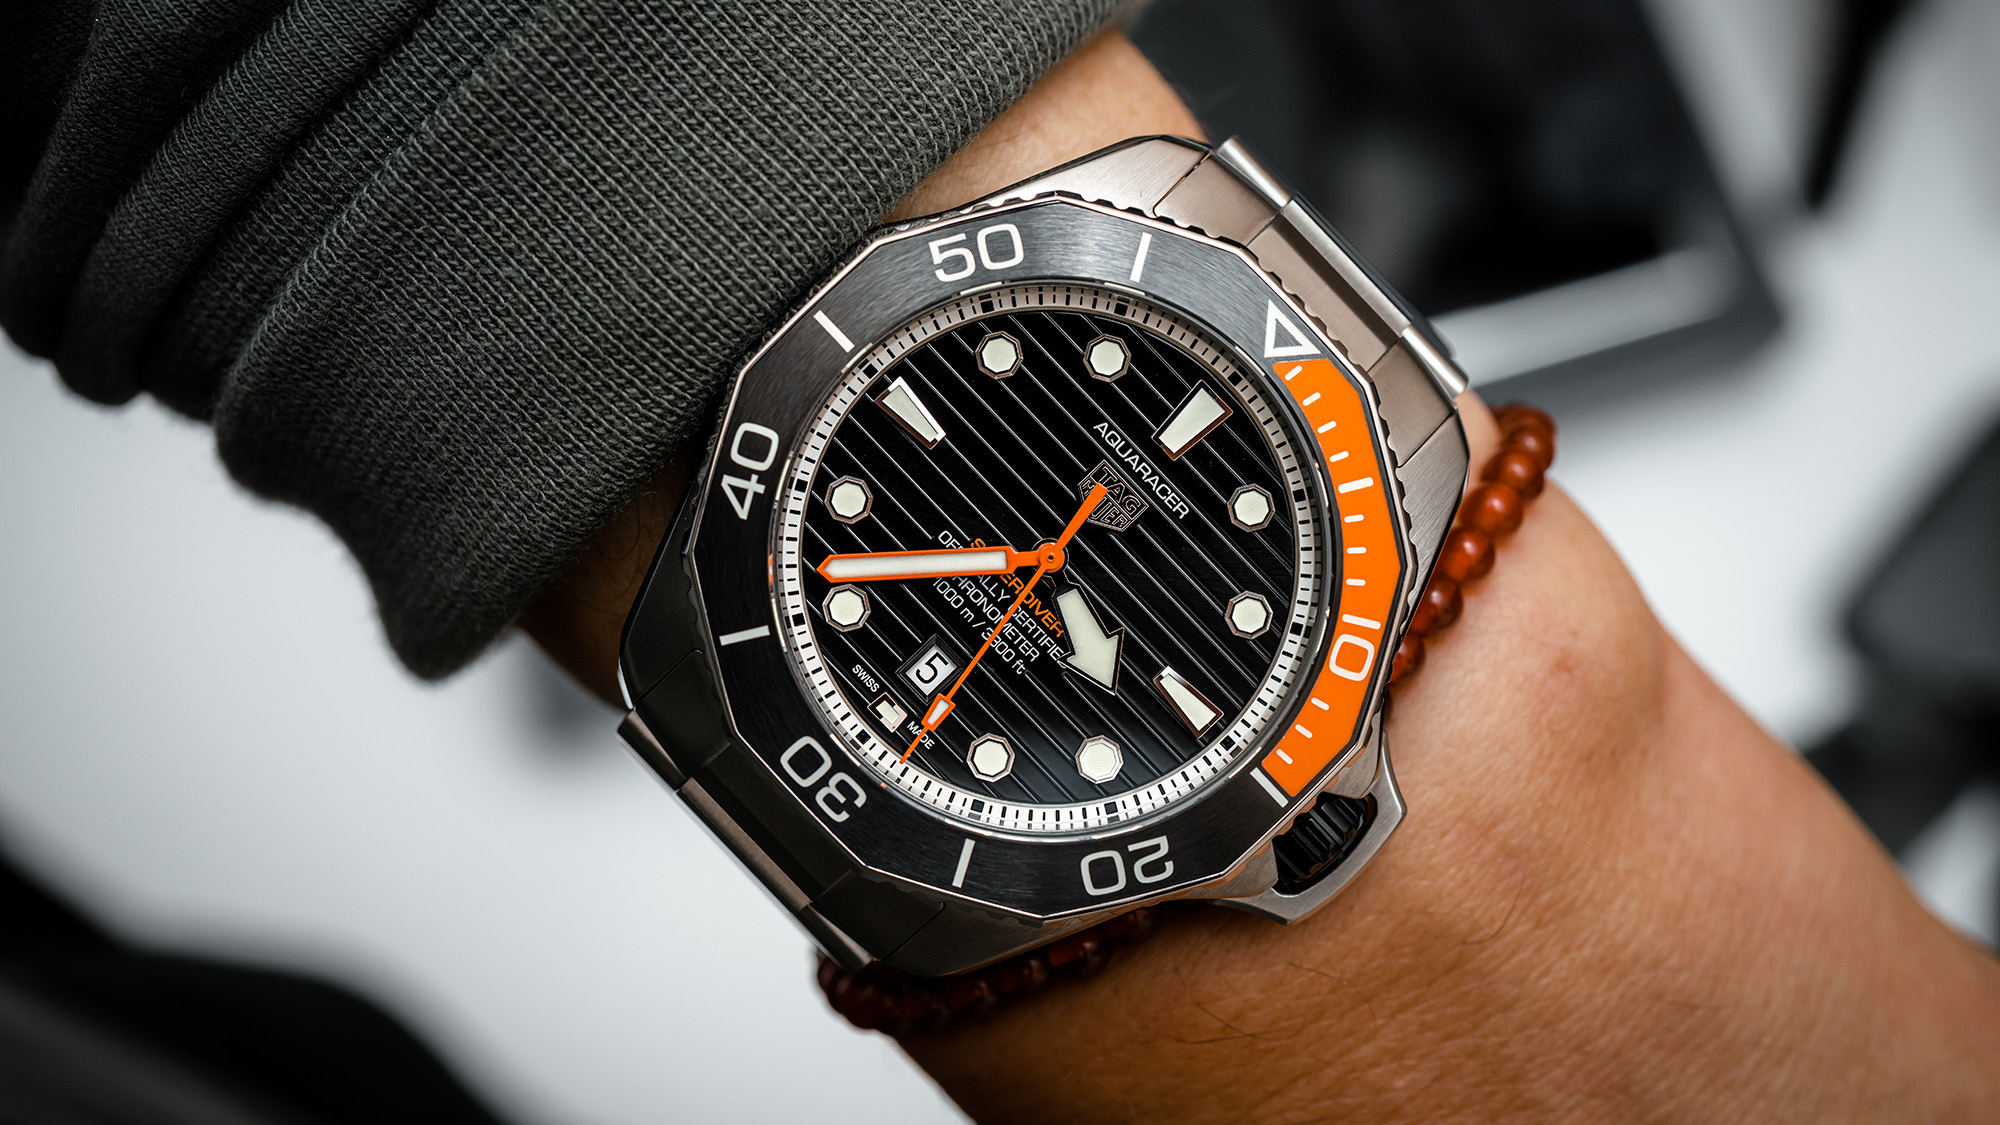 Reaching New Depths Of Dive Watch Excellence With The TAG Heuer Aquaracer  Professional 1000 Superdiver